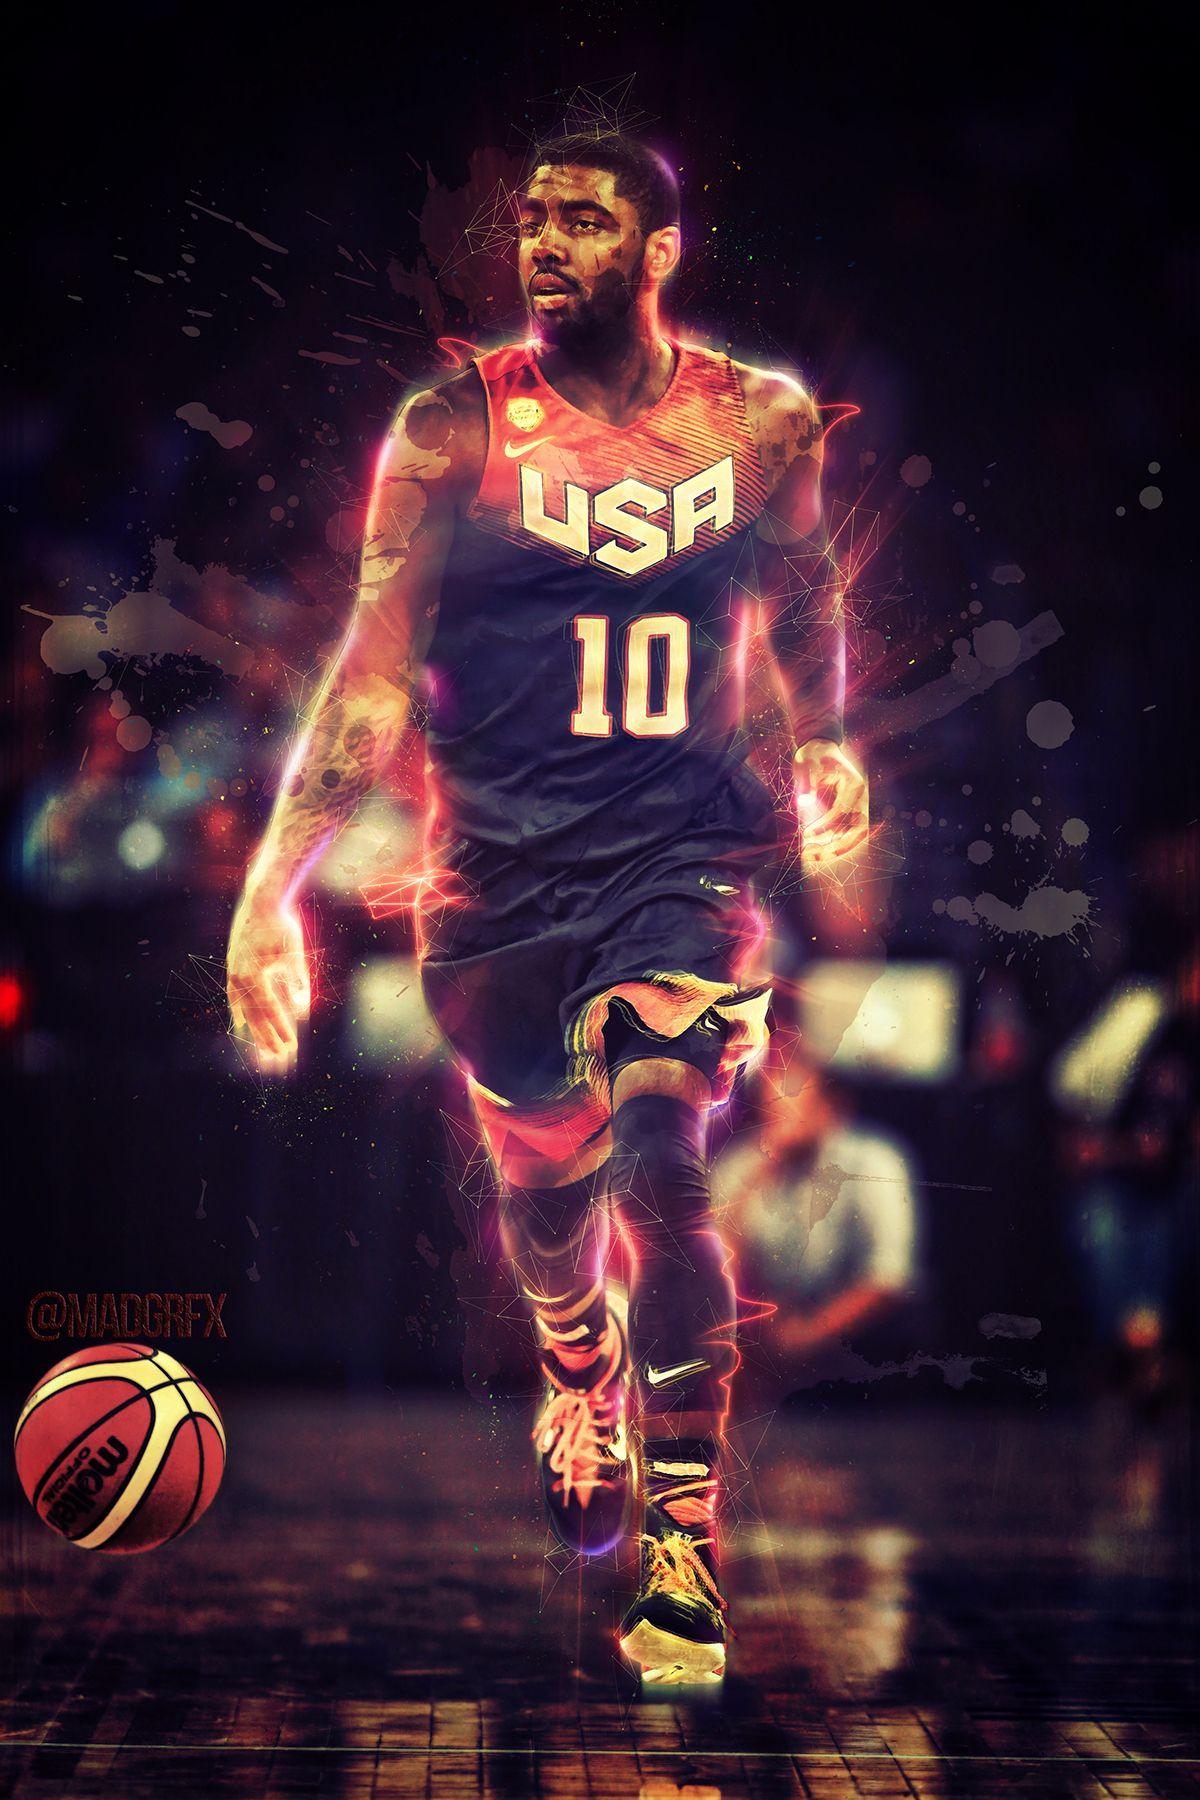 New Kyrie Irving Wallpaper. Download High Quality HD Image